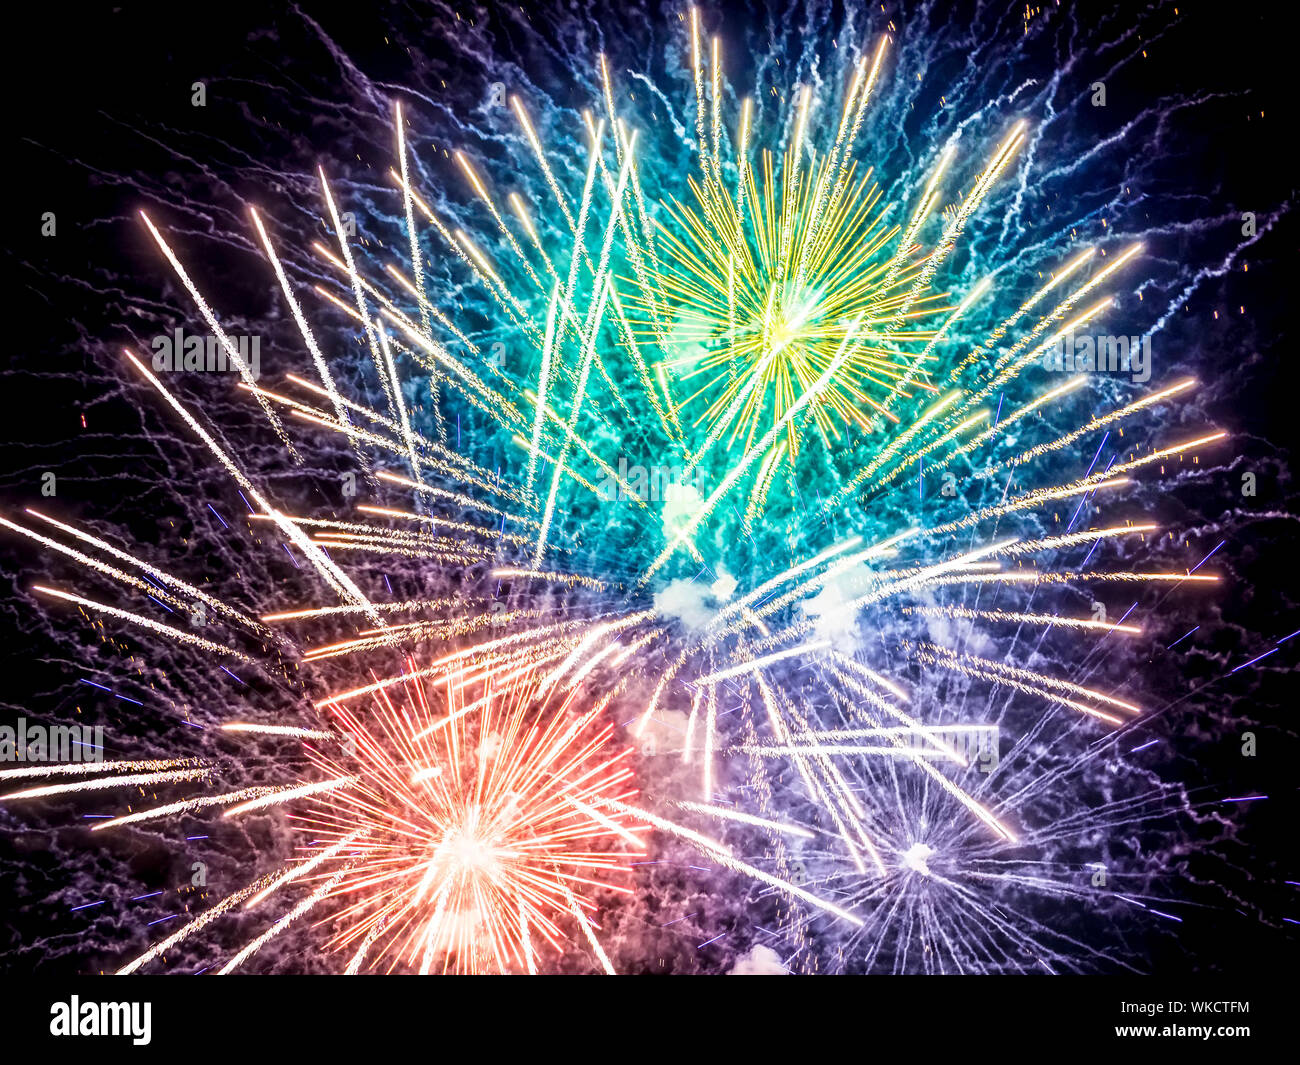 Low Angle View Of Colorful Fireworks Display At Night Stock Photo